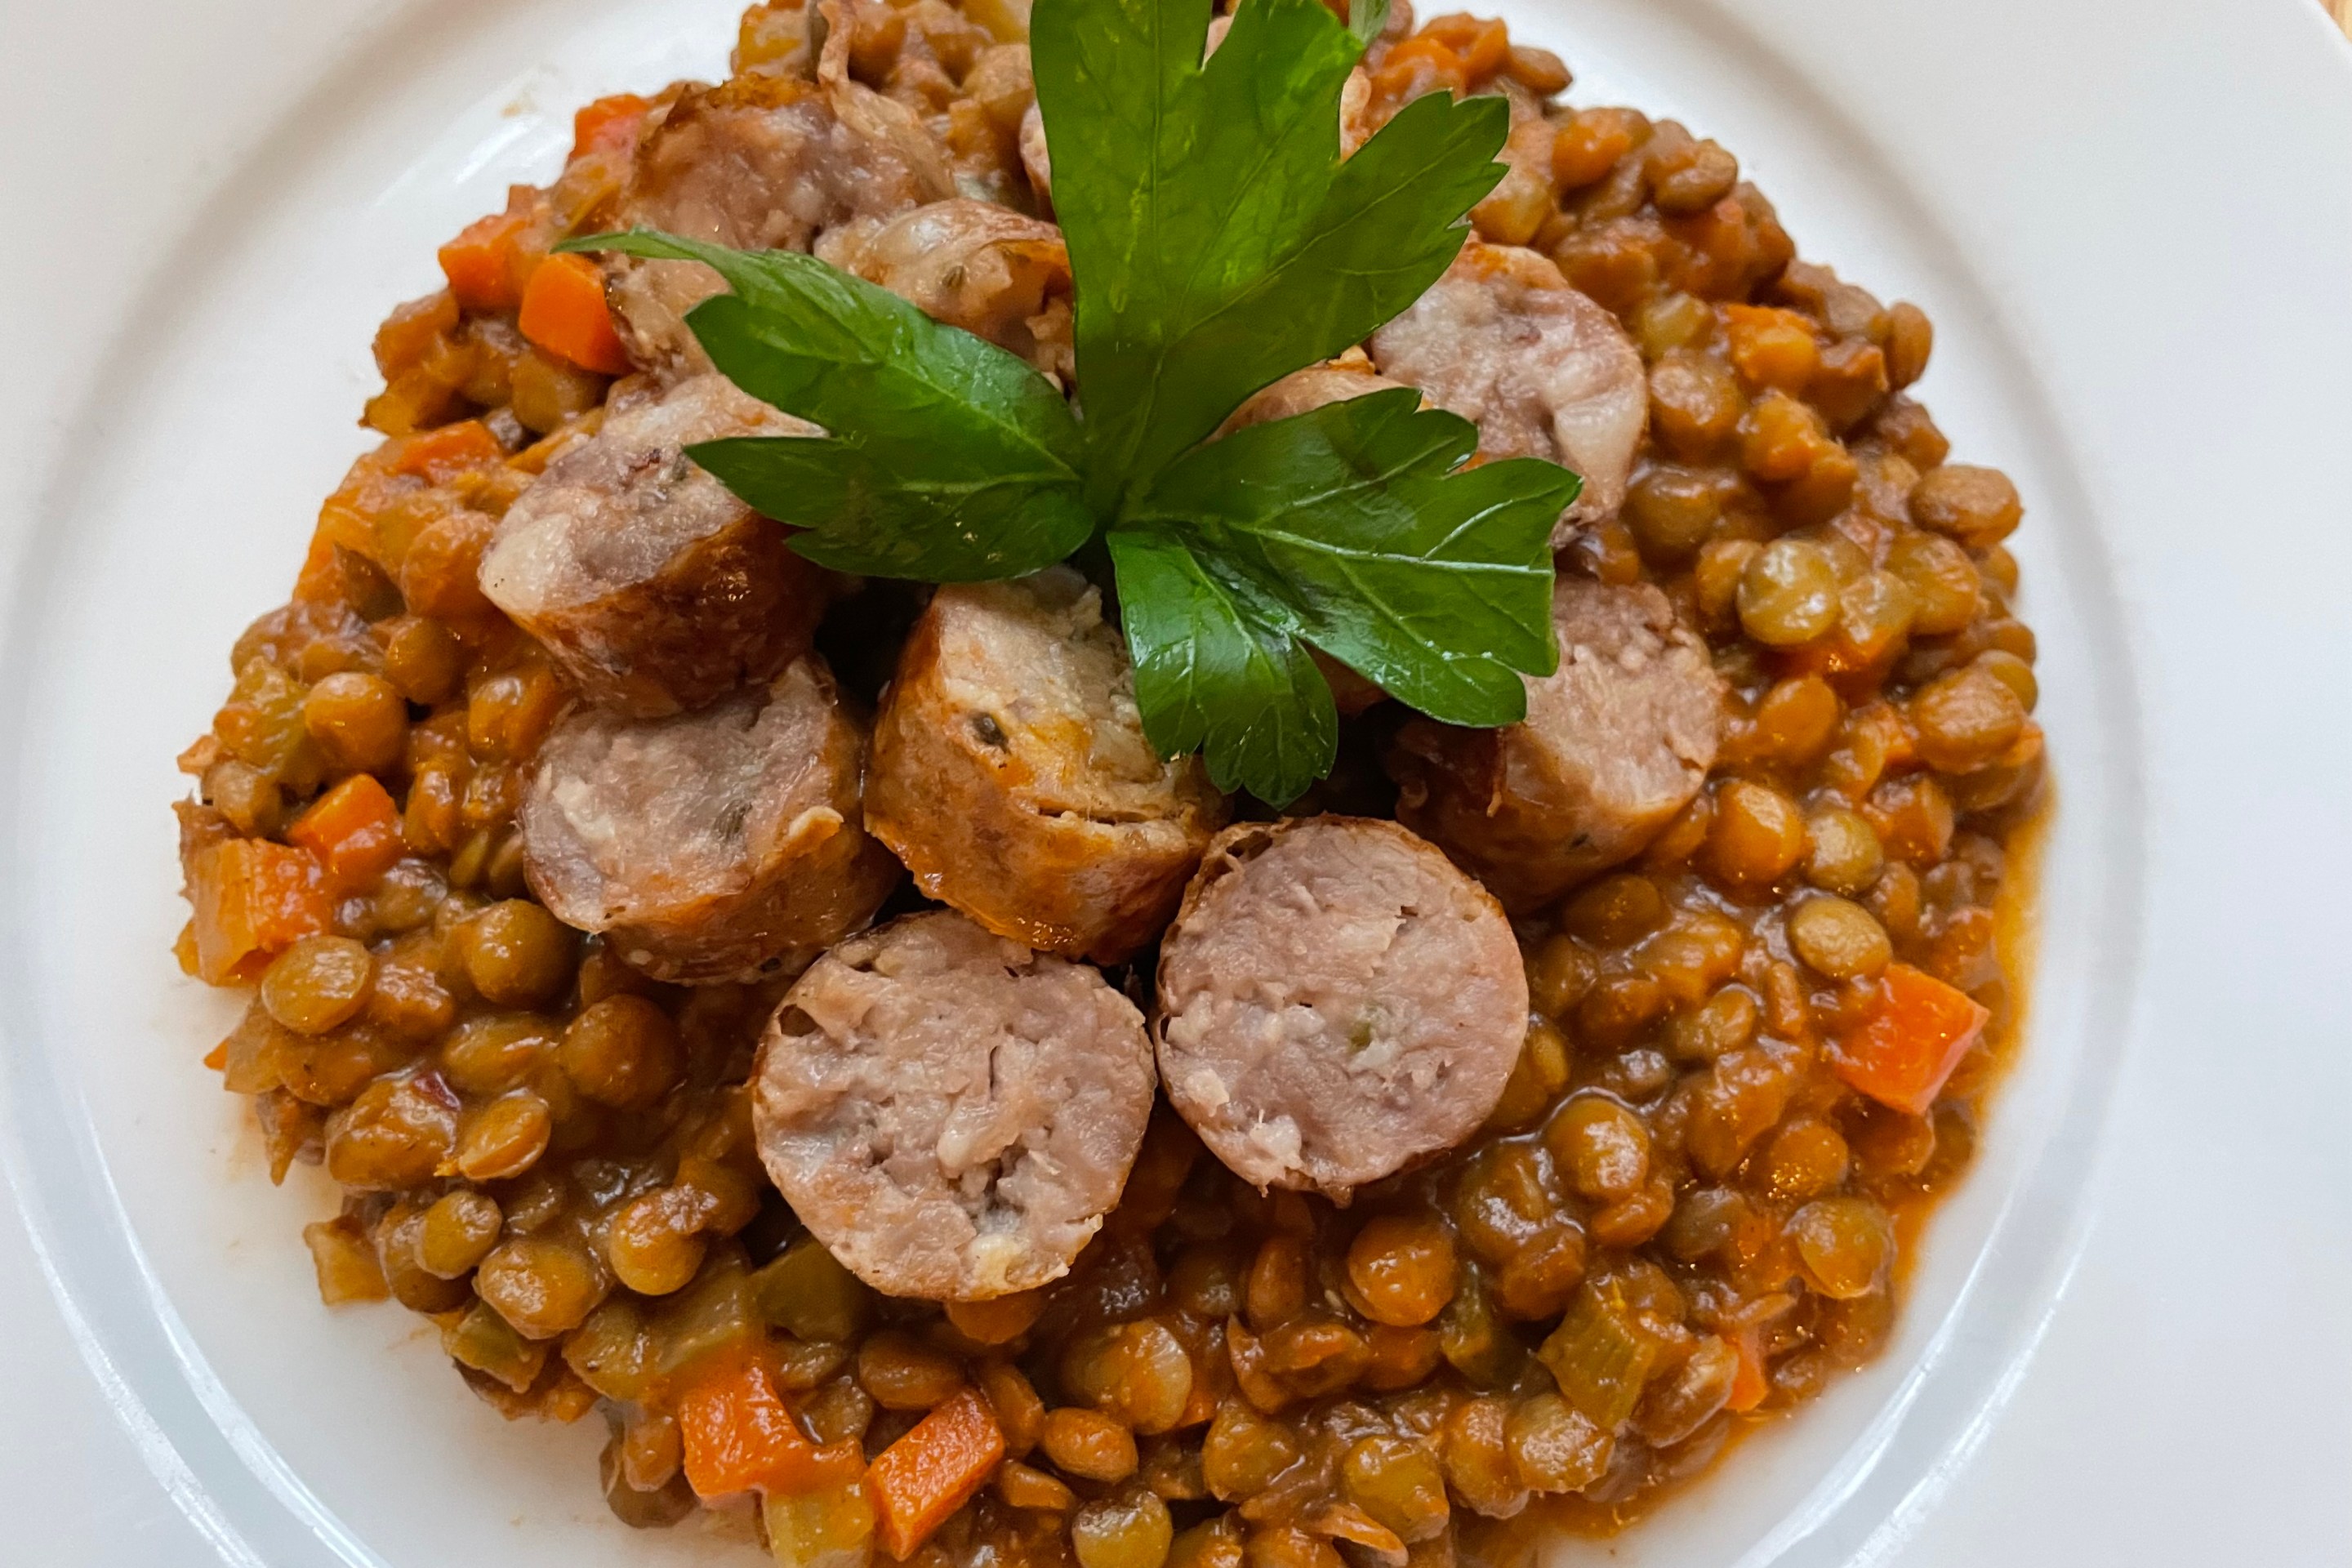 Lentils with sausage.